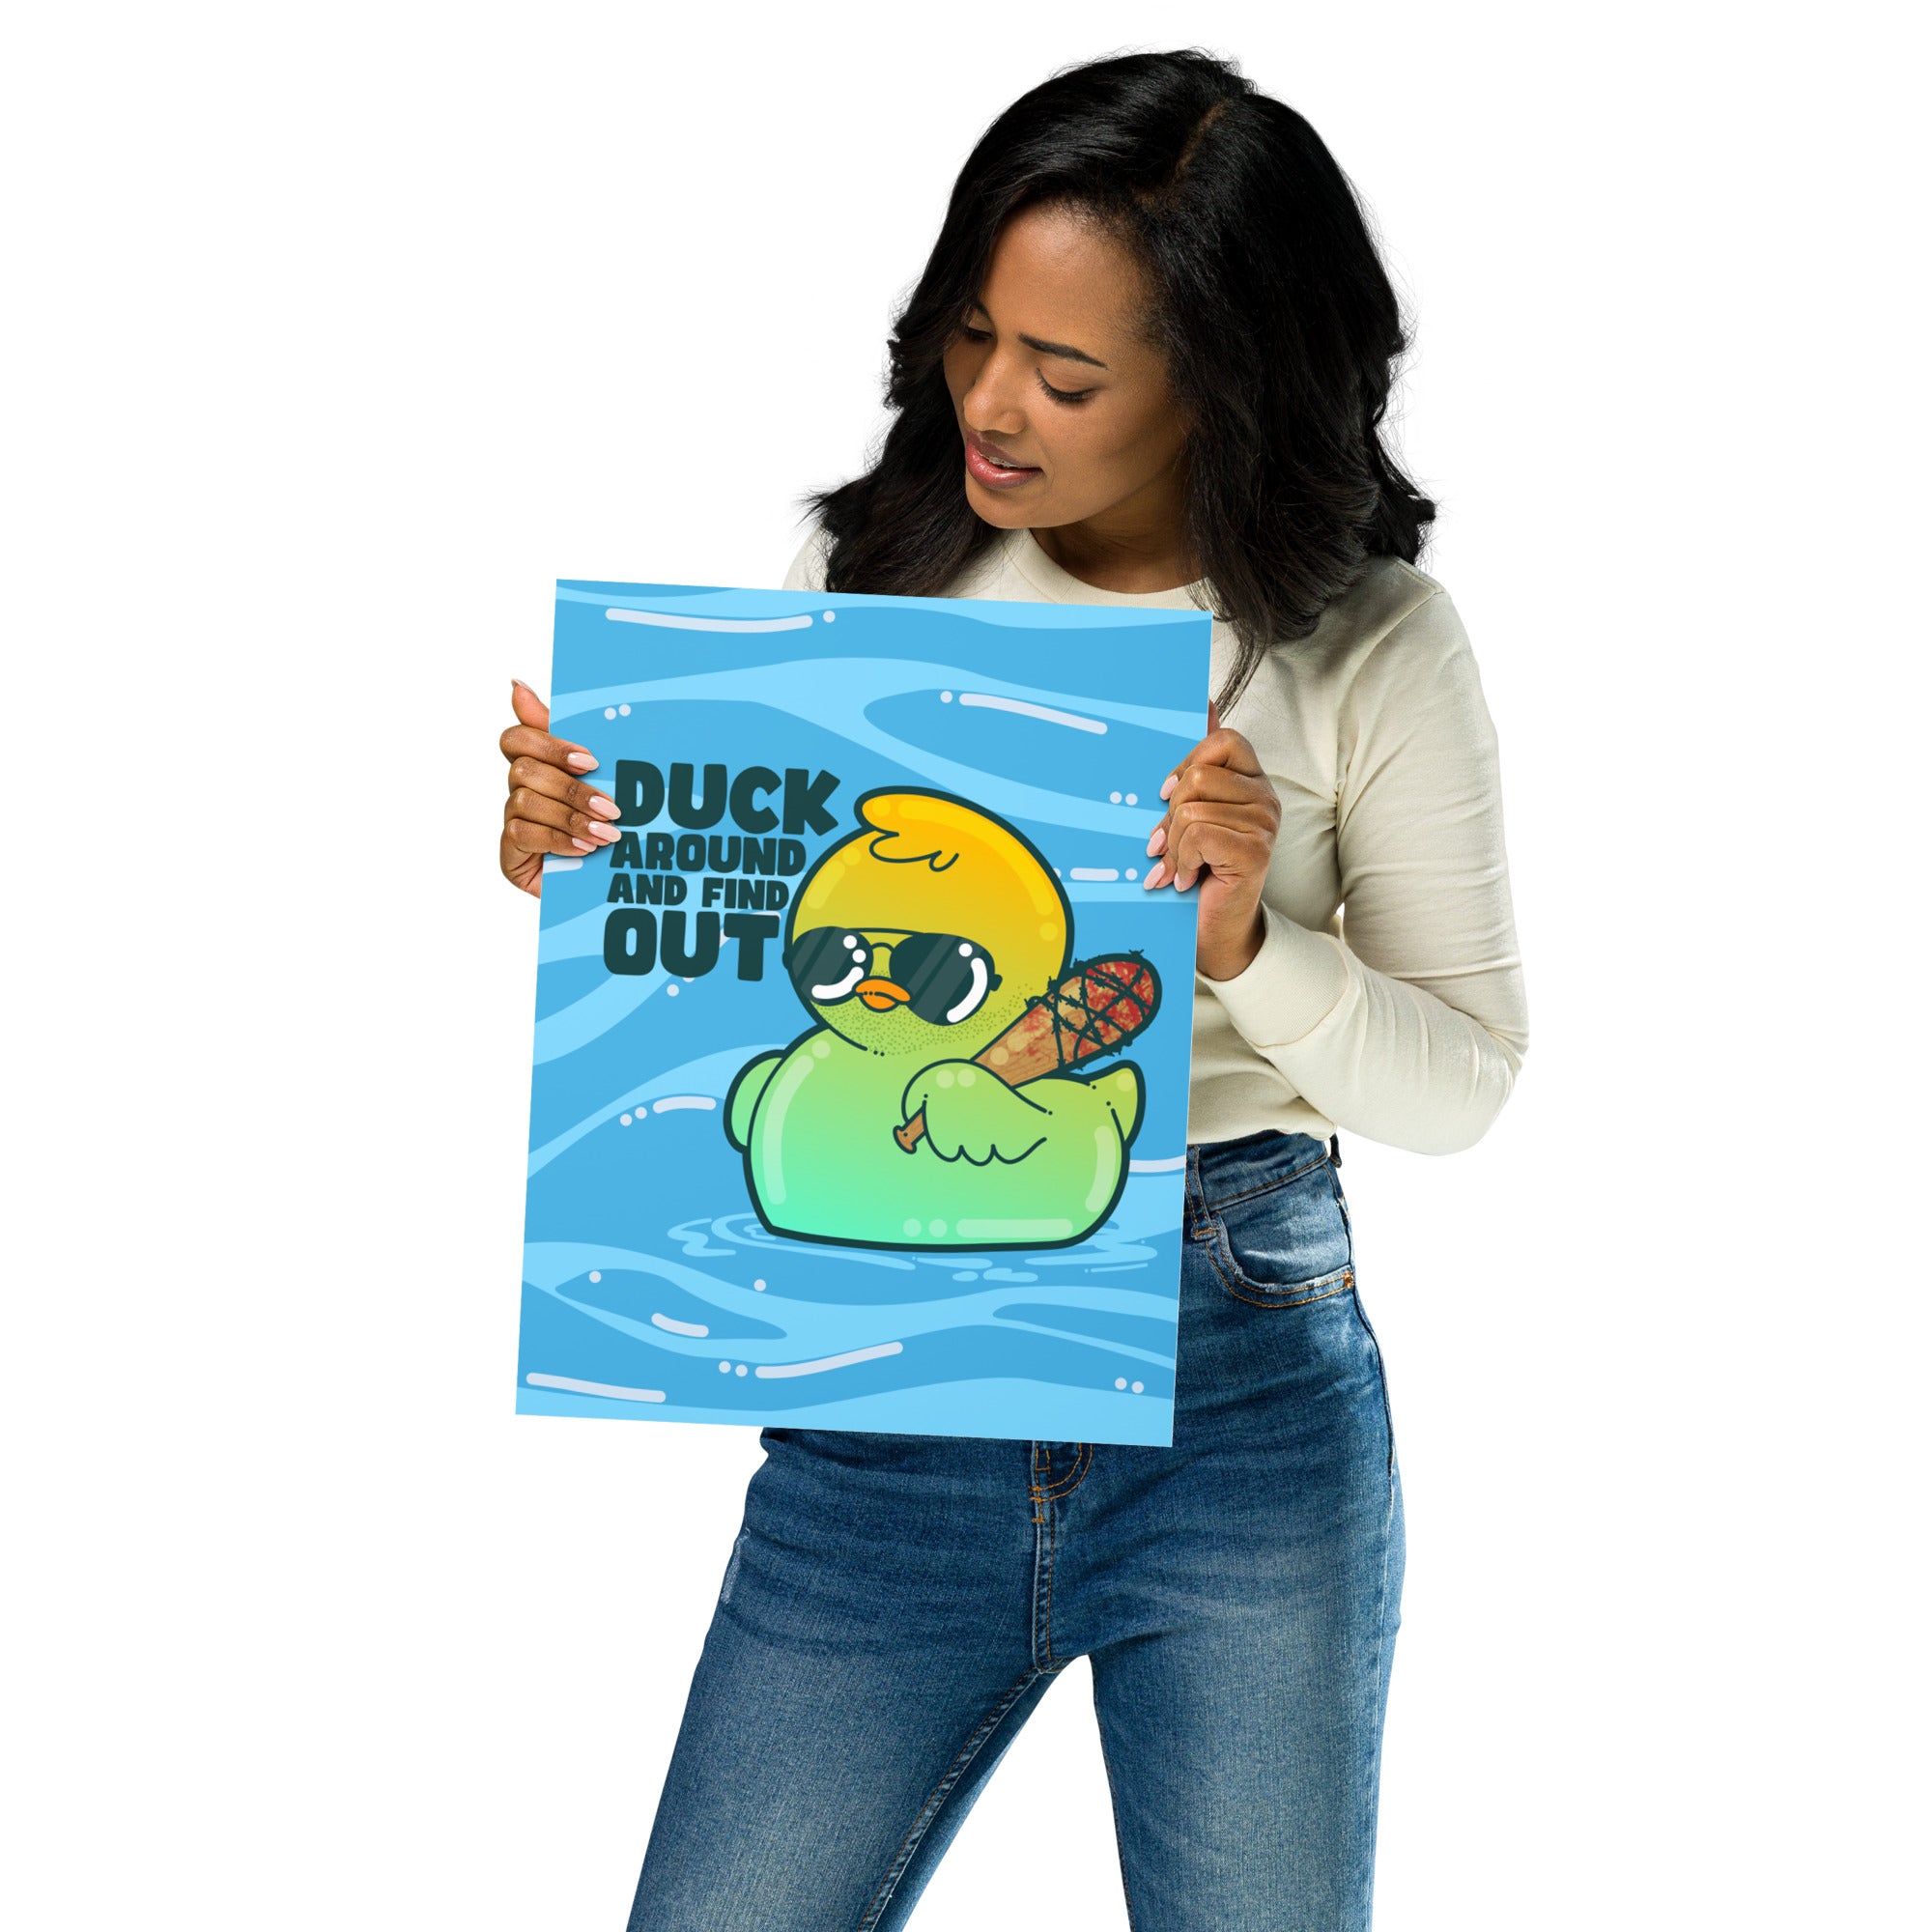 DUCK AROUND AND FIND OUT - Poster 11 in X 14 in - ChubbleGumLLC